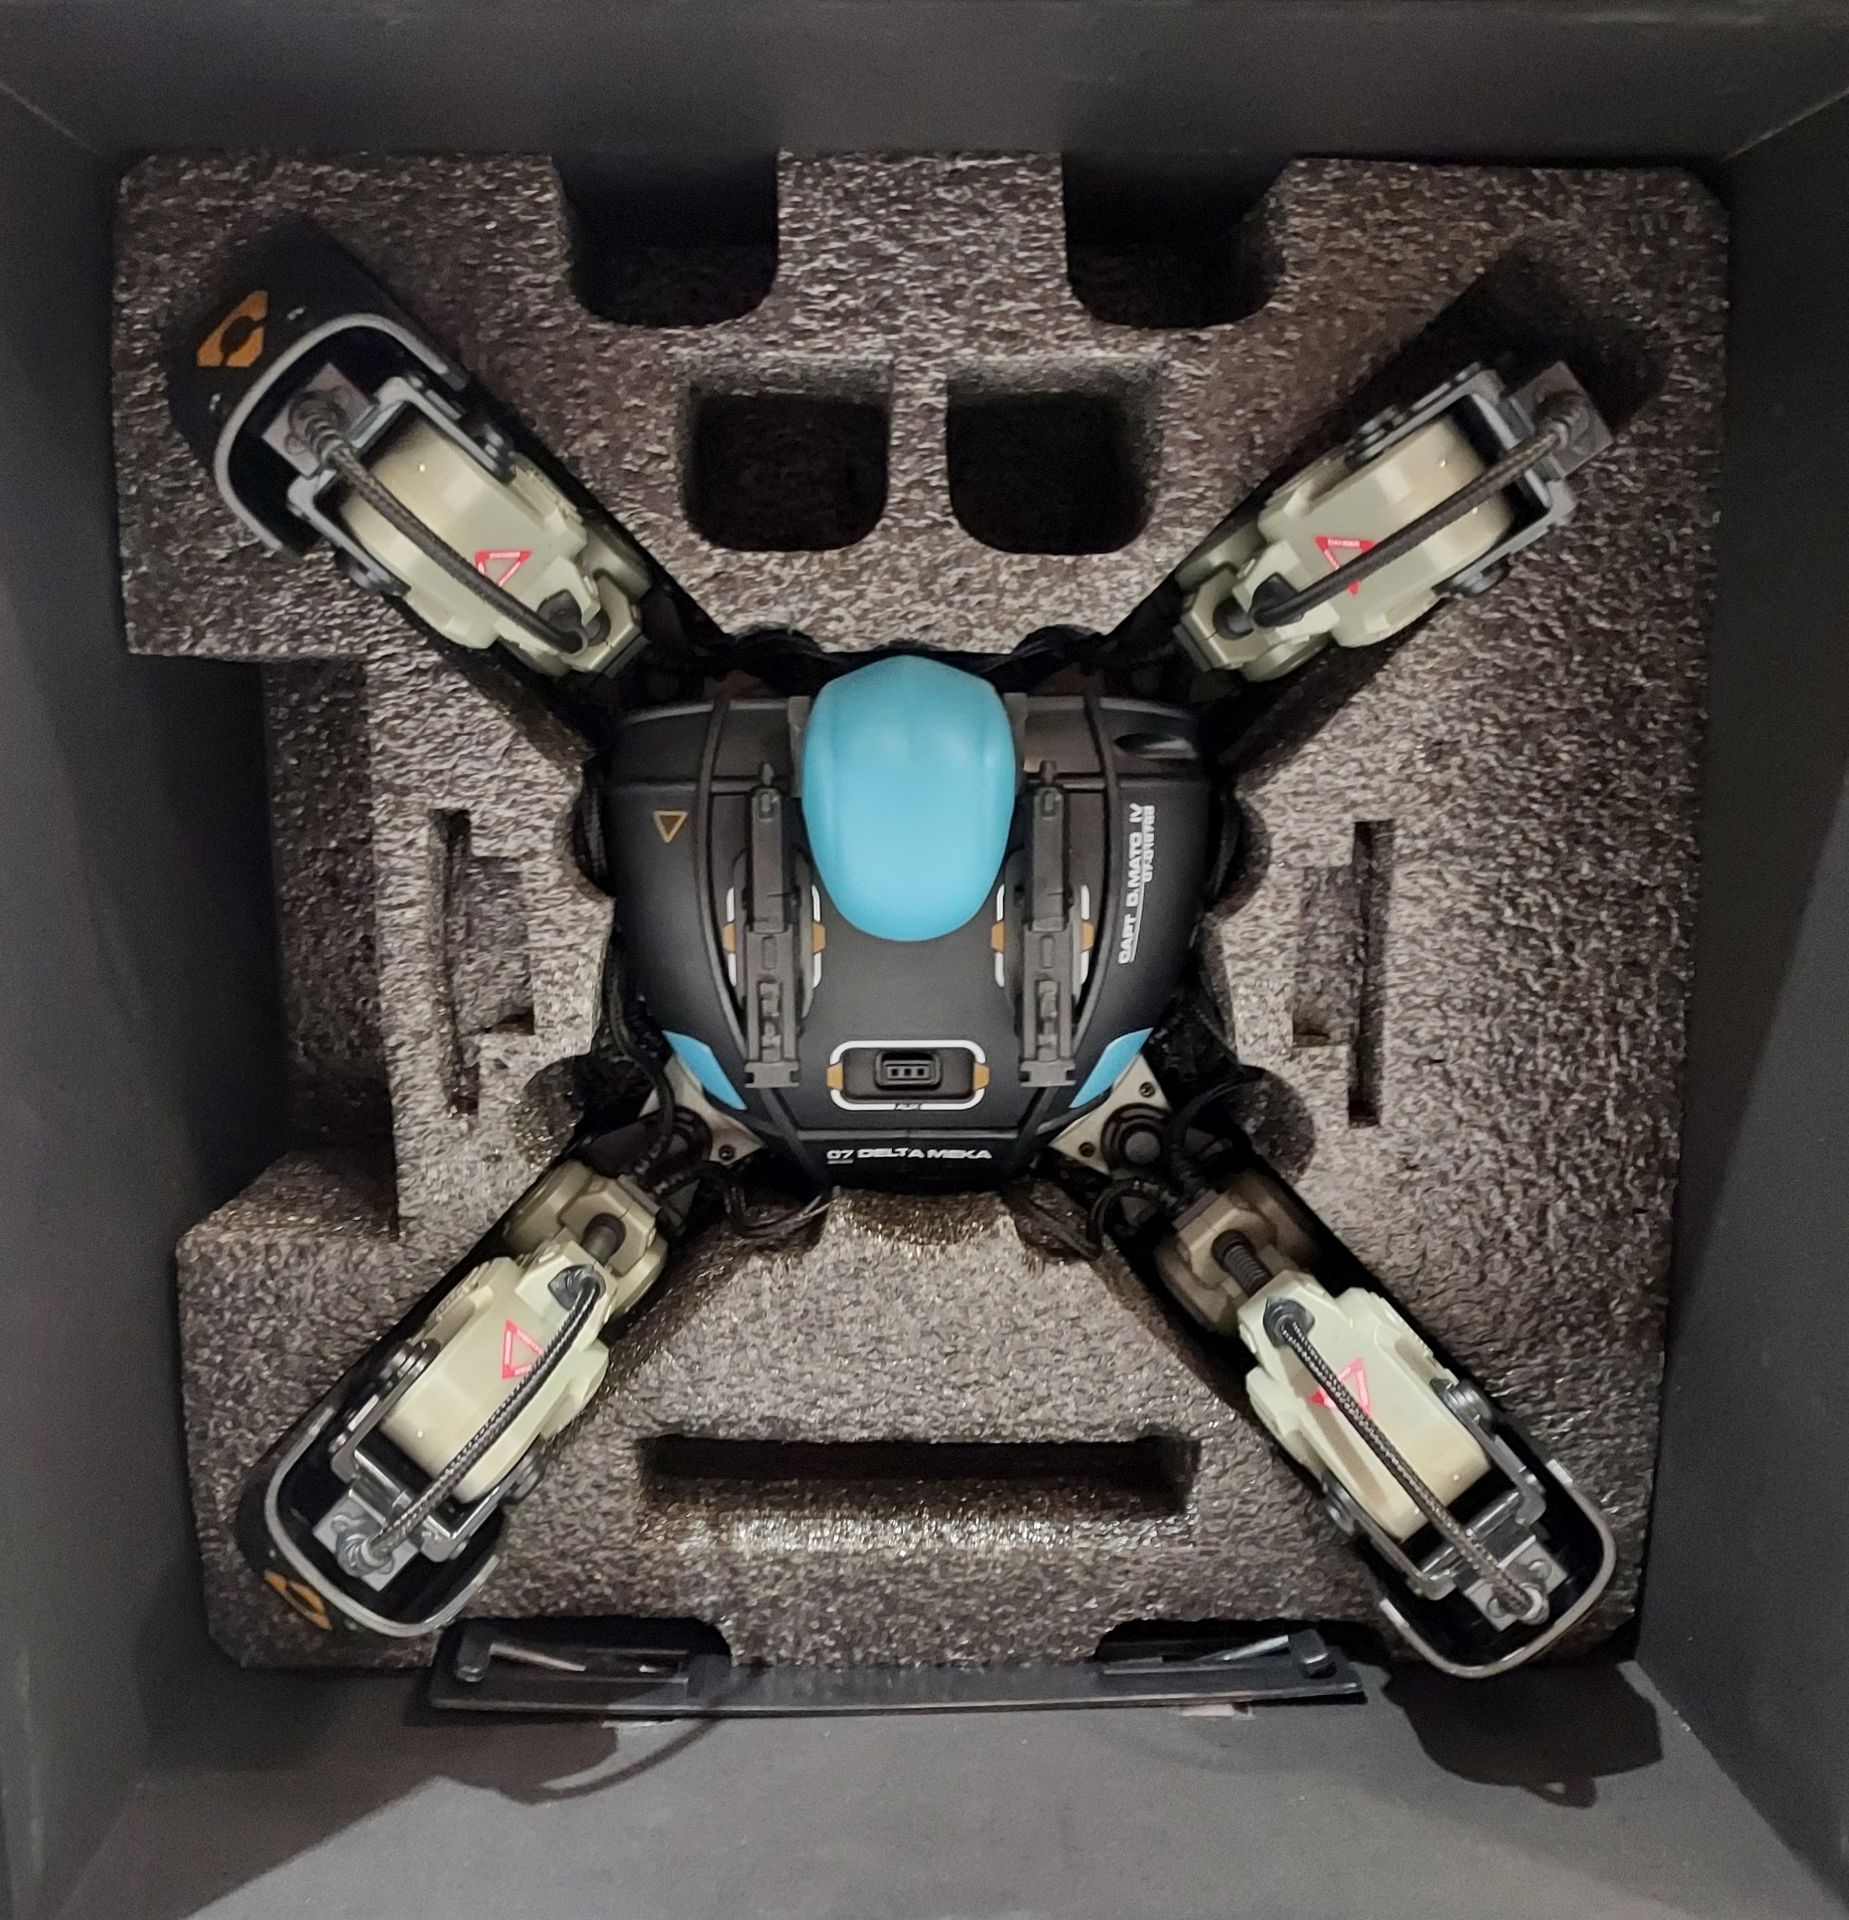 3 X MEKAMON NEXT LEVEL ROBOTICS GAMING AR (PLEASE NOTE BATTERIES HAVE EXCEEDED EXPIRATION DATE) - - Image 4 of 4